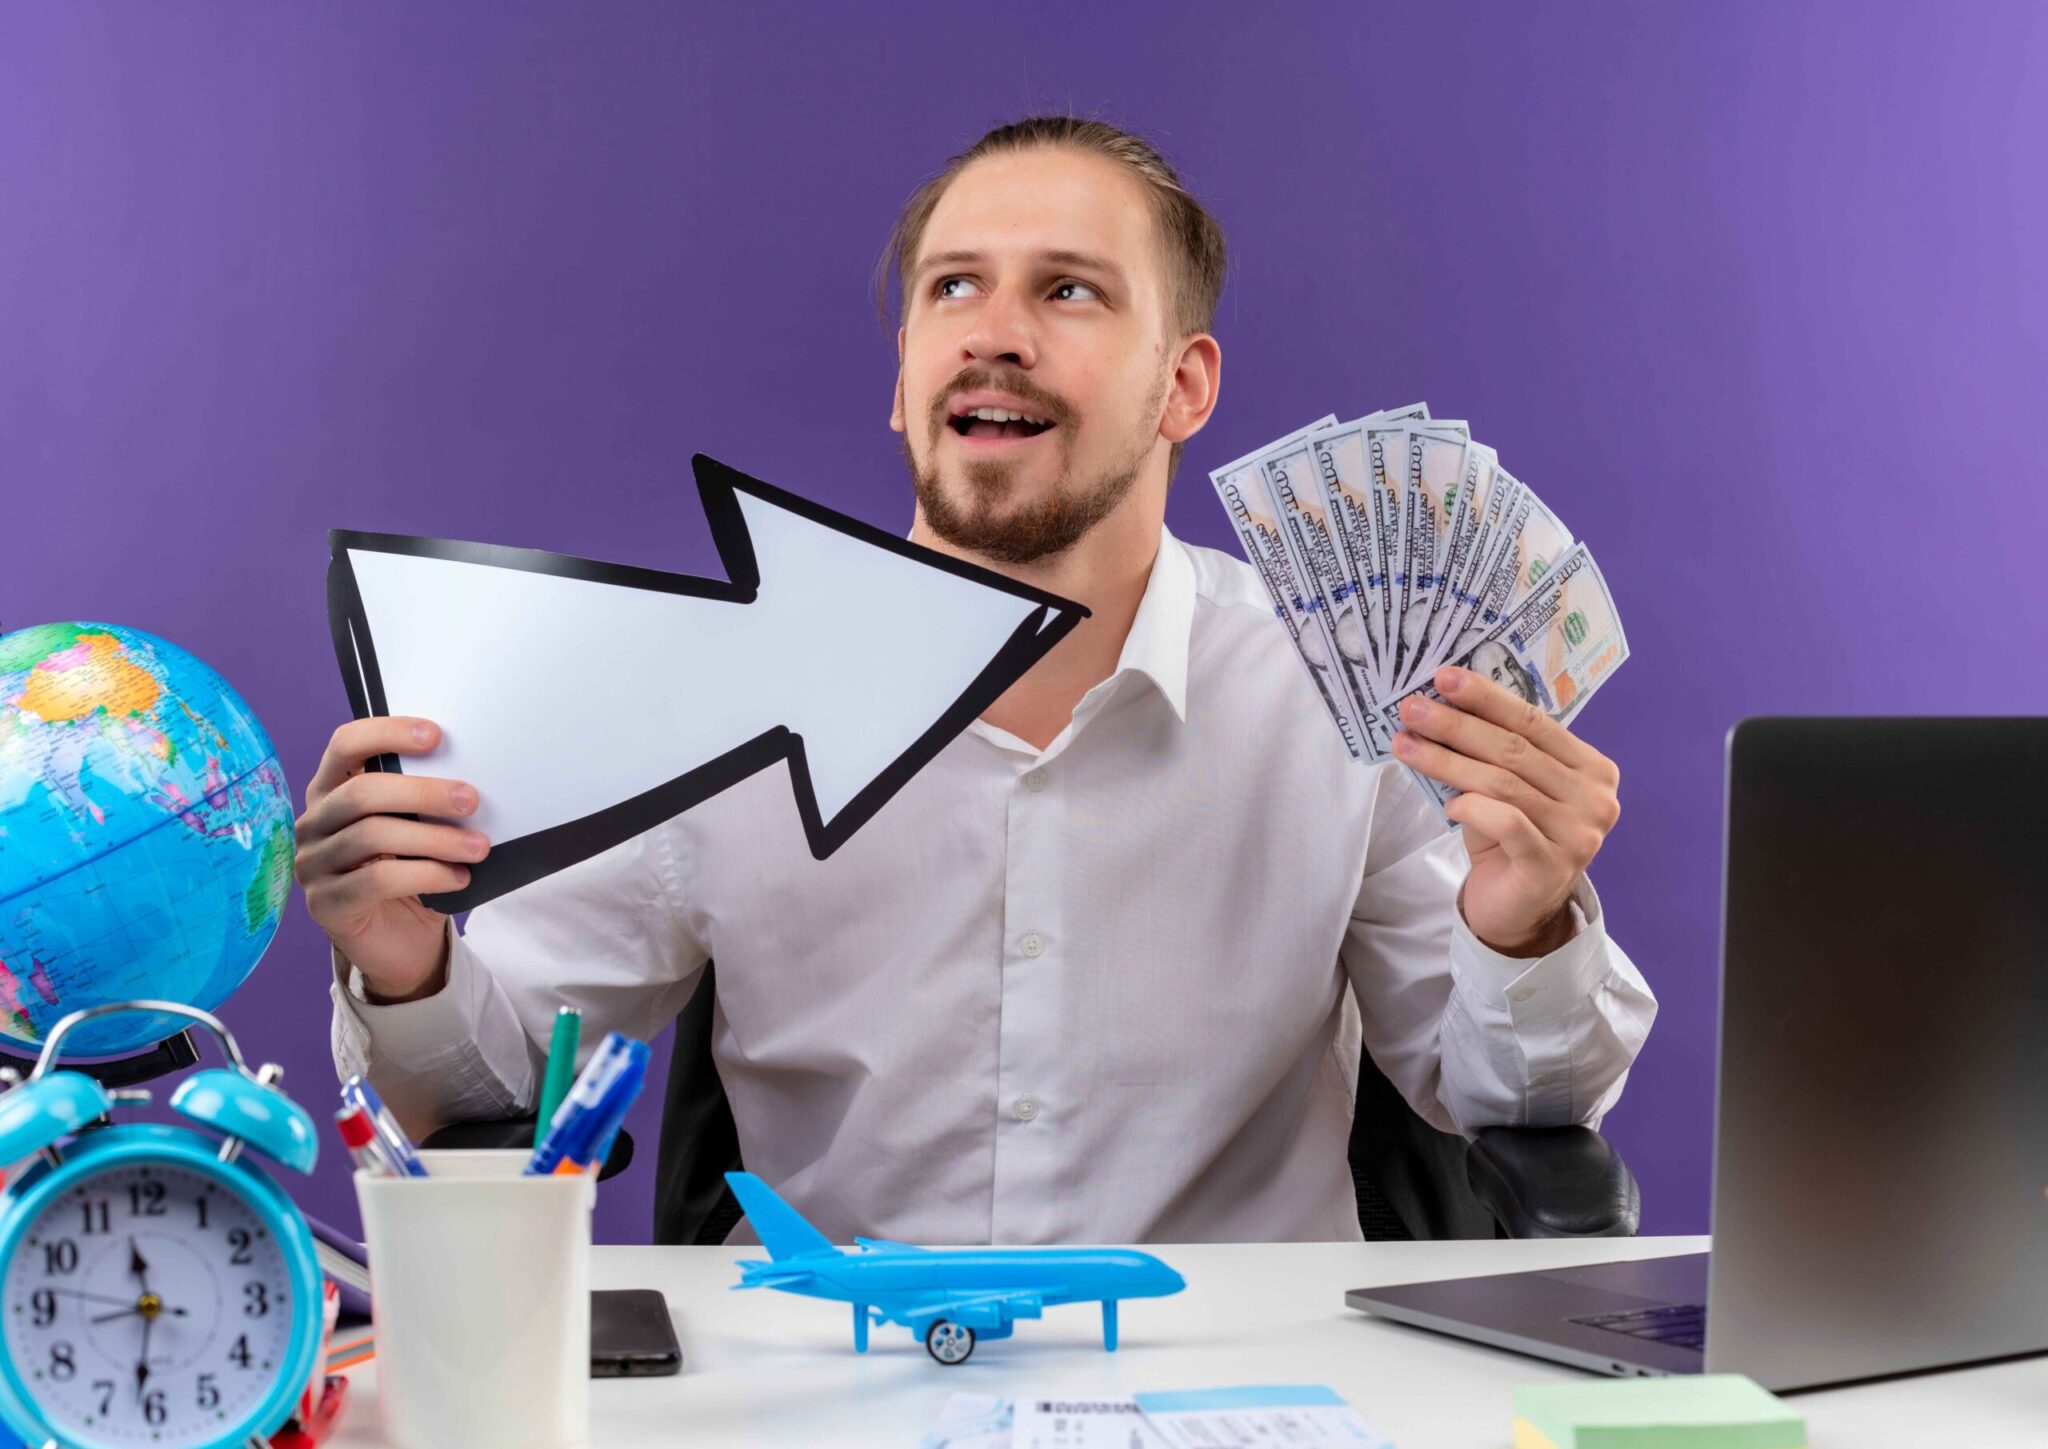 handsome-businessman-white-shirt-holding-white-arrow-showing-cash-looking-aside-with-smile-face-sitting-table-offise-purple-background